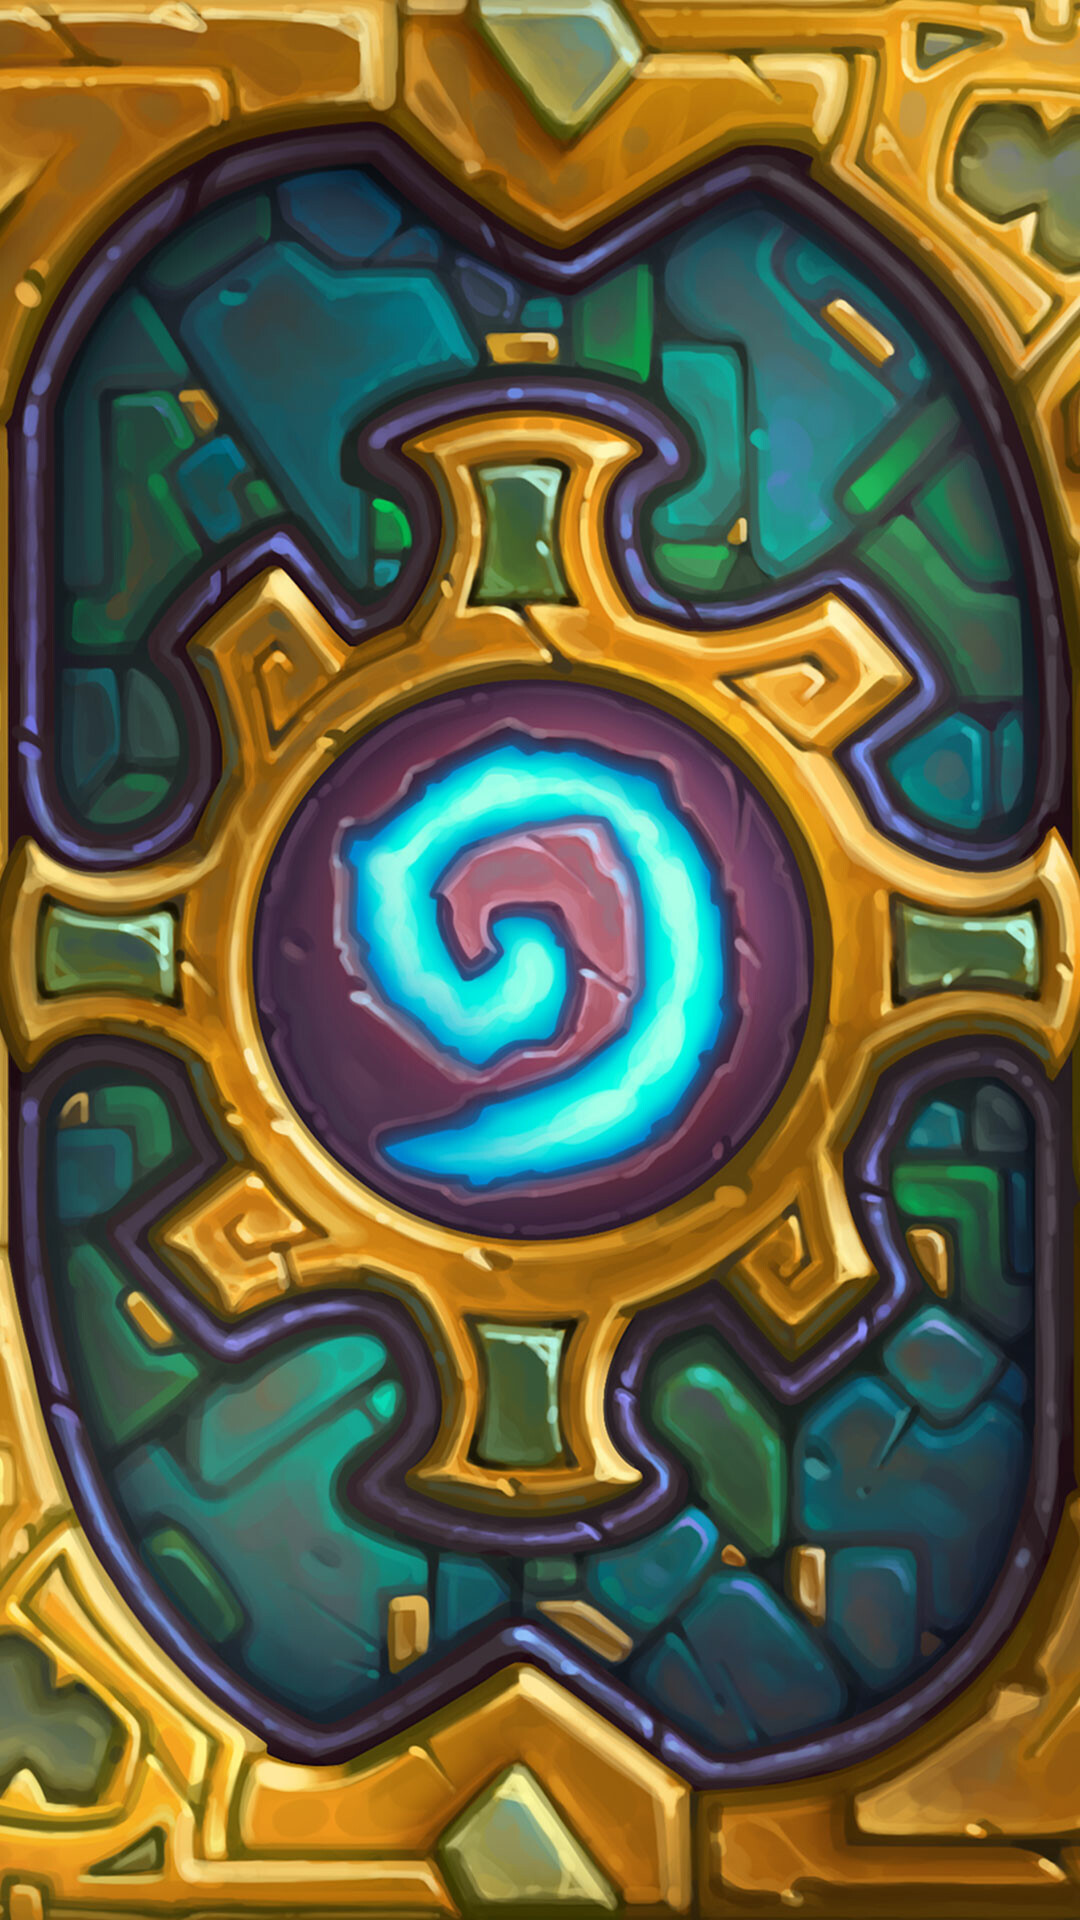 Hearthstone: One of the most successful games of the last decade, Card game. 1080x1920 Full HD Wallpaper.